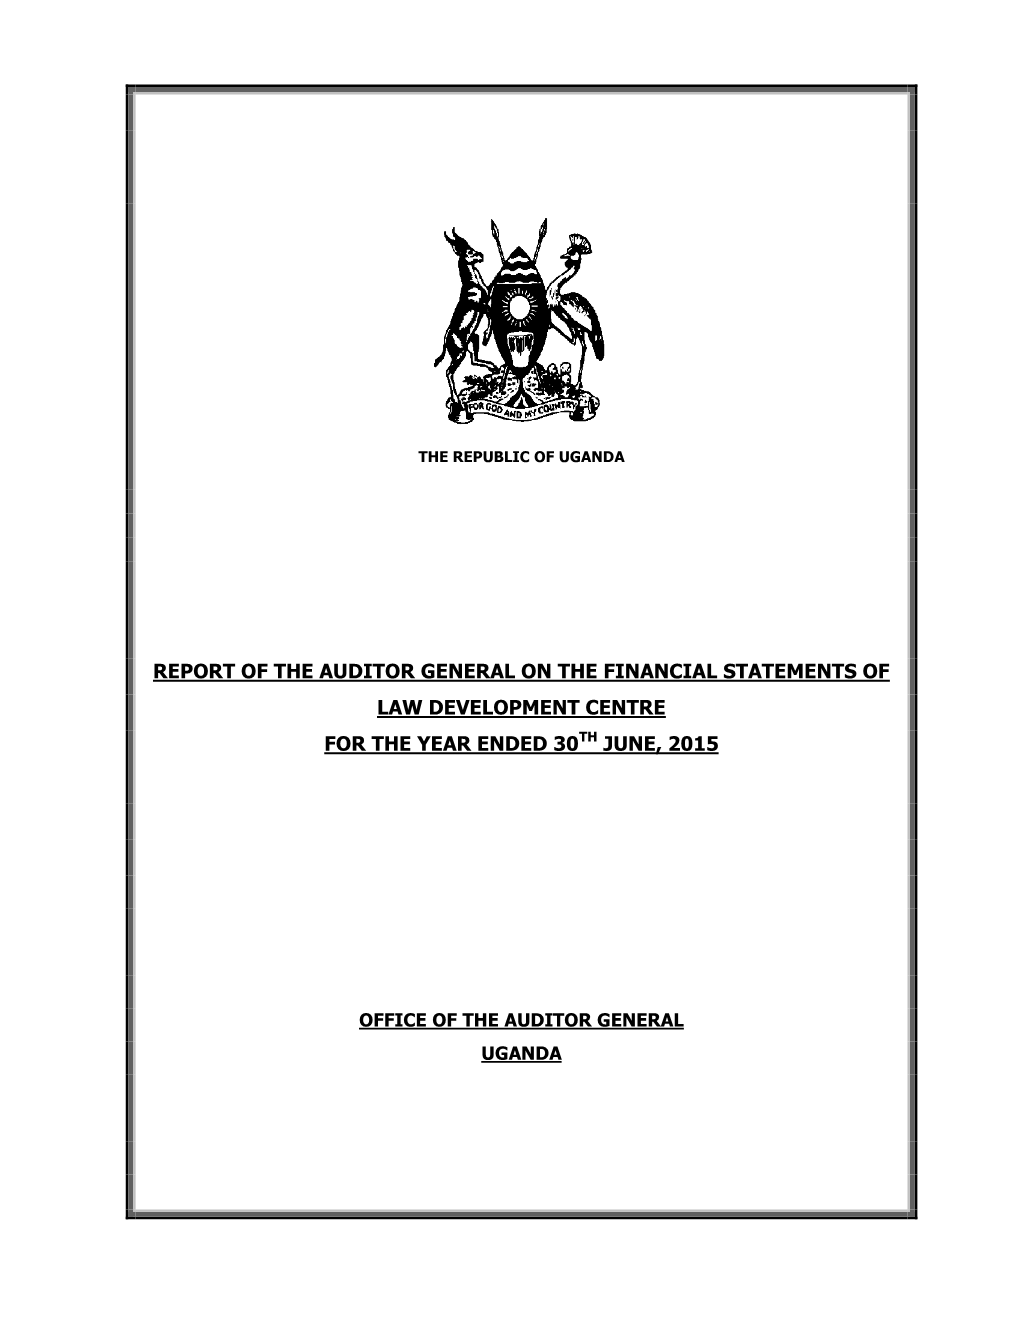 Report of the Auditor General on the Financial Statements of Law Development Centre for the Year Ended 30Th June, 2015